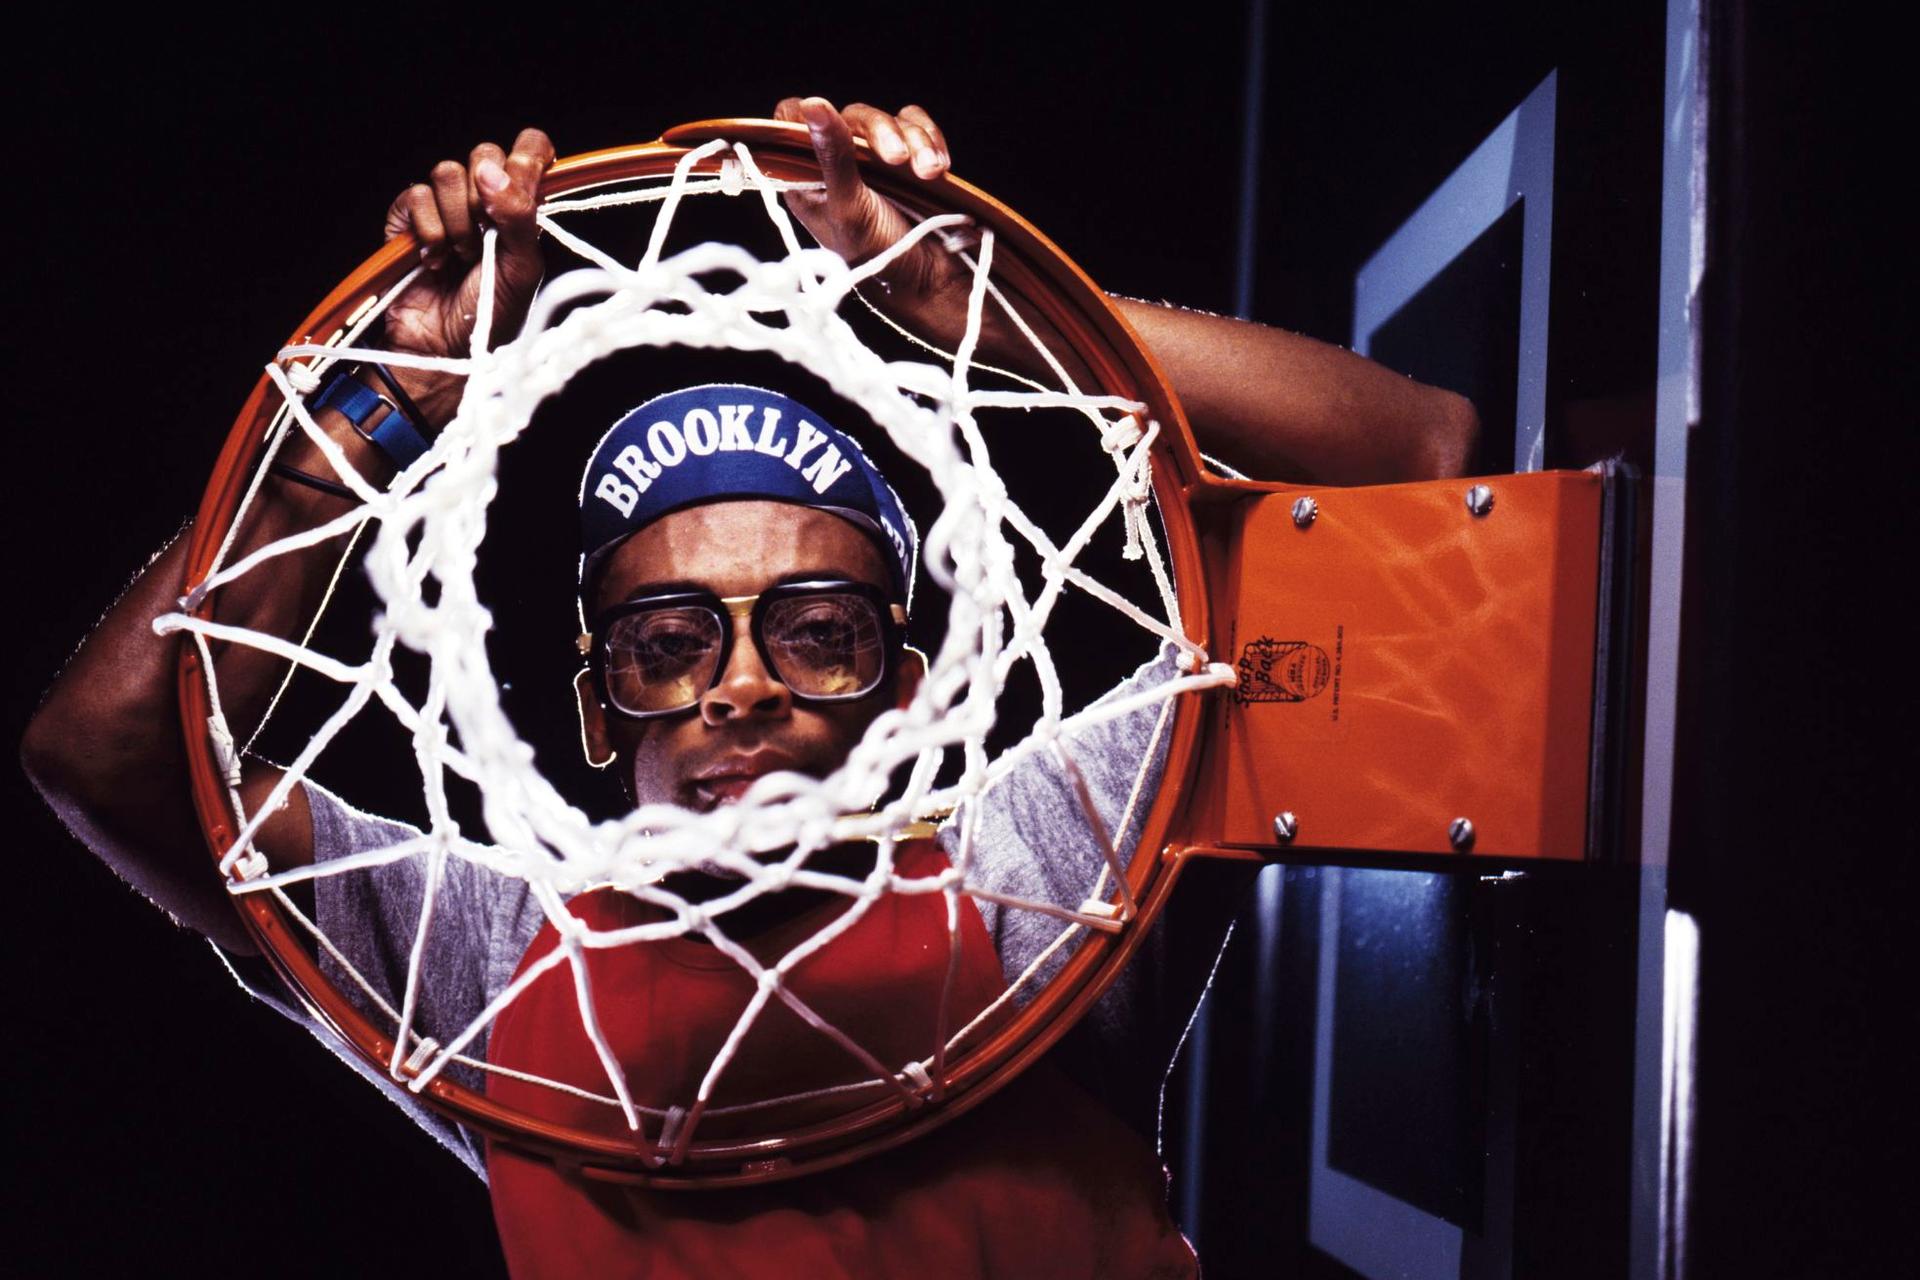 Portrait of Spike Lee with basketball net